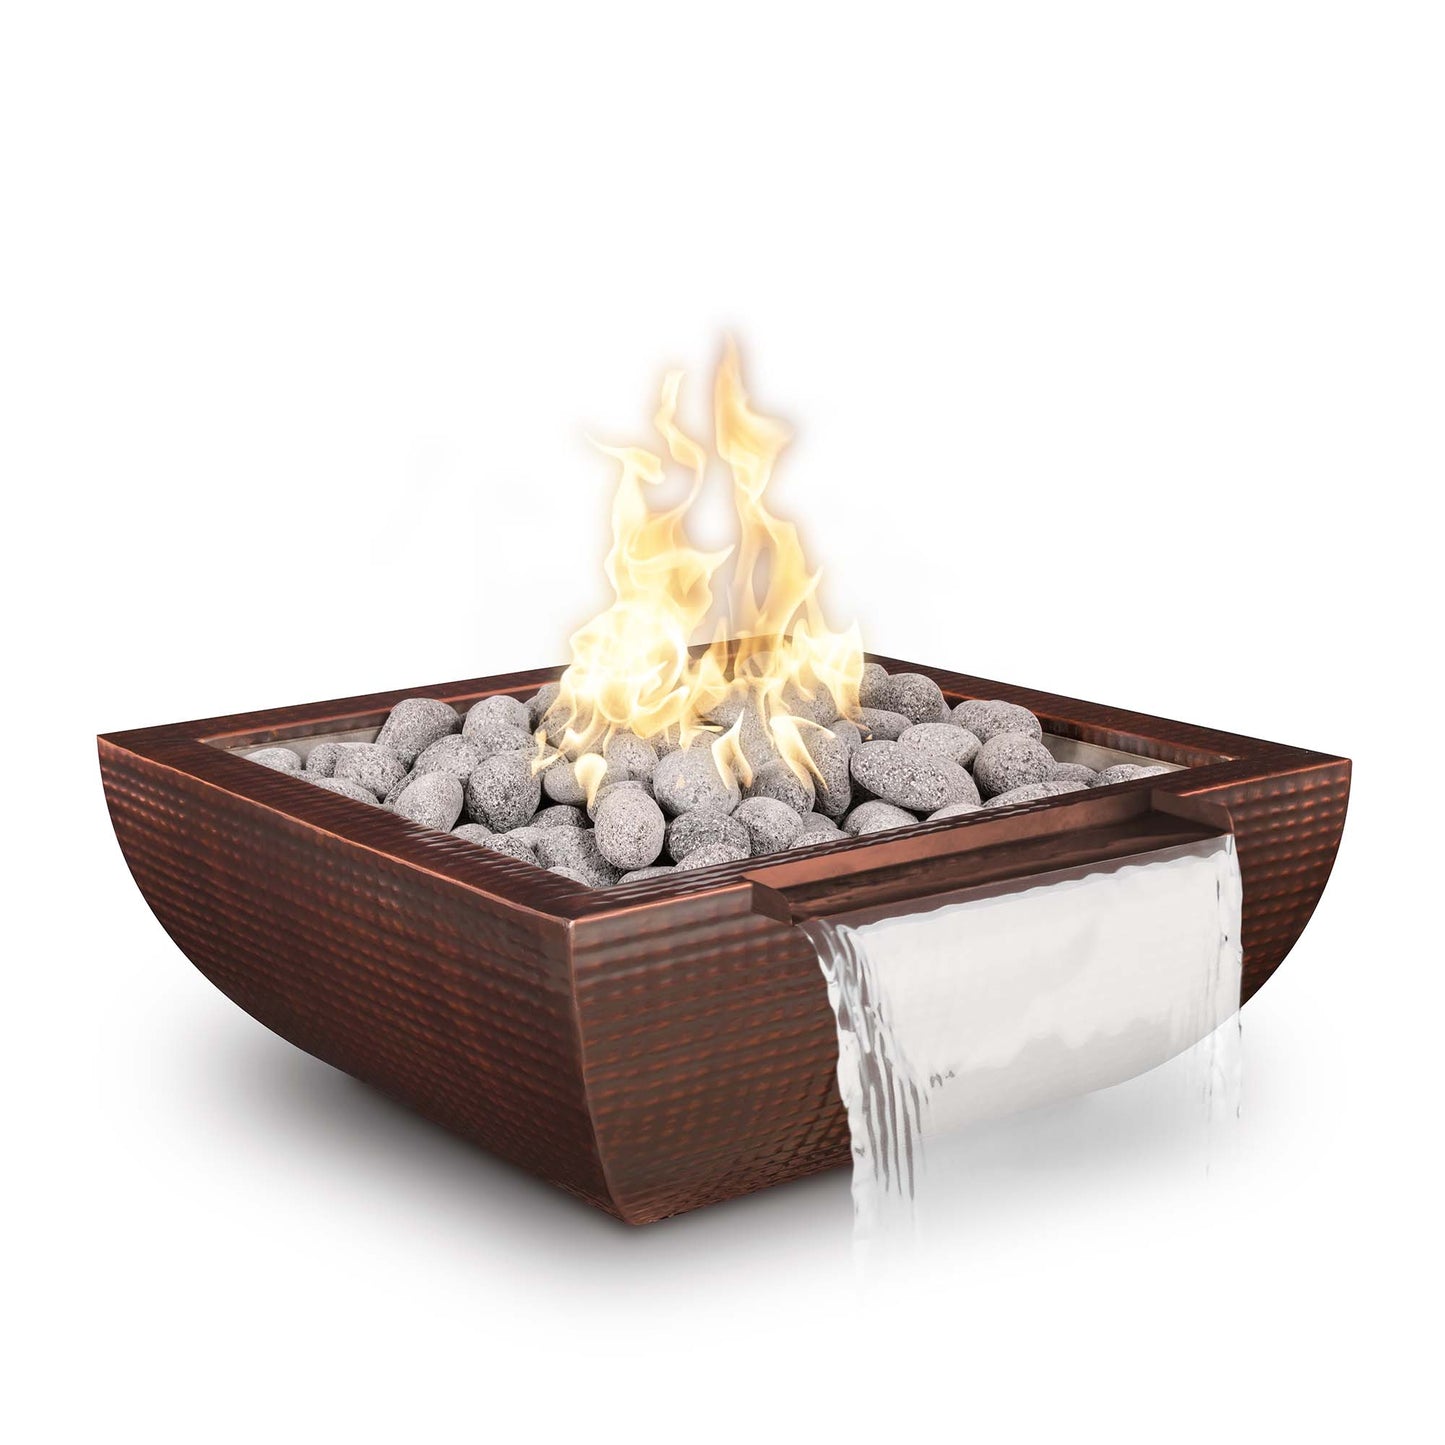 The Outdoor Plus Avalon Wide Spill 24" Pewter Powder Coated Metal Liquid Propane Fire & Water Bowl with Match Lit with Flame Sense Ignition